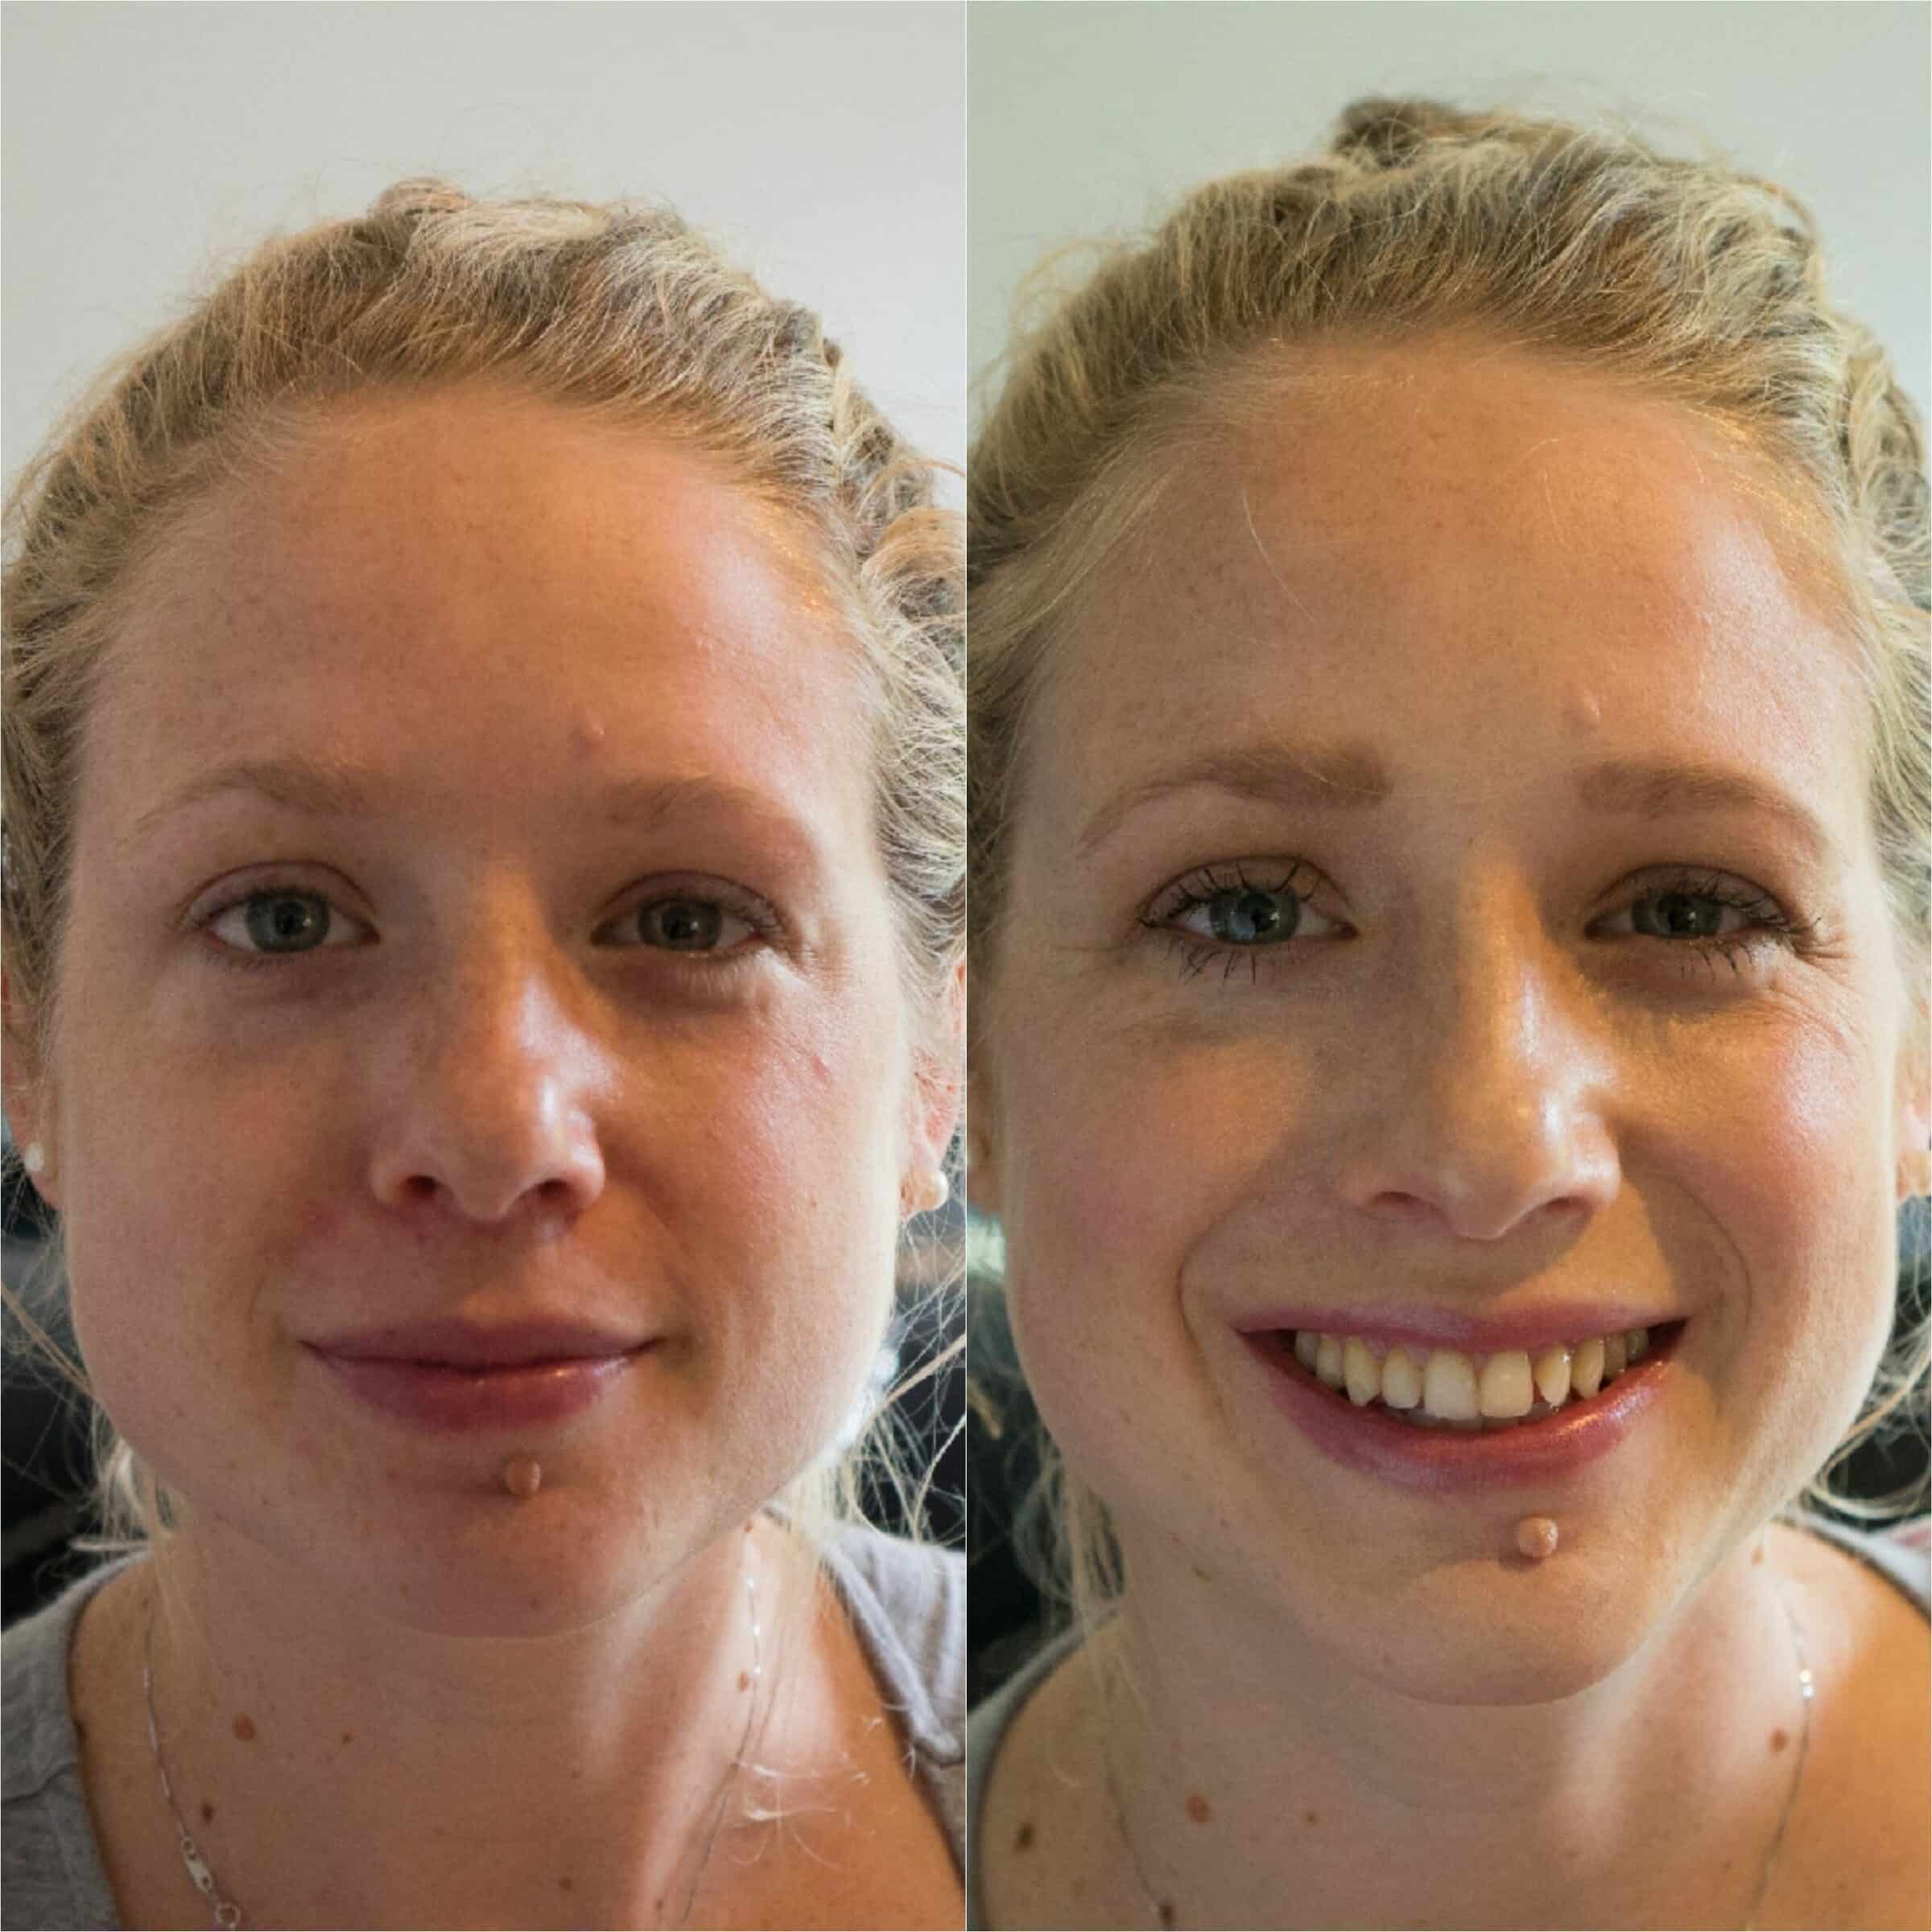 New Mom Before and After with Maskcara Beauty Girl at www.maskcarabeautygirl.com